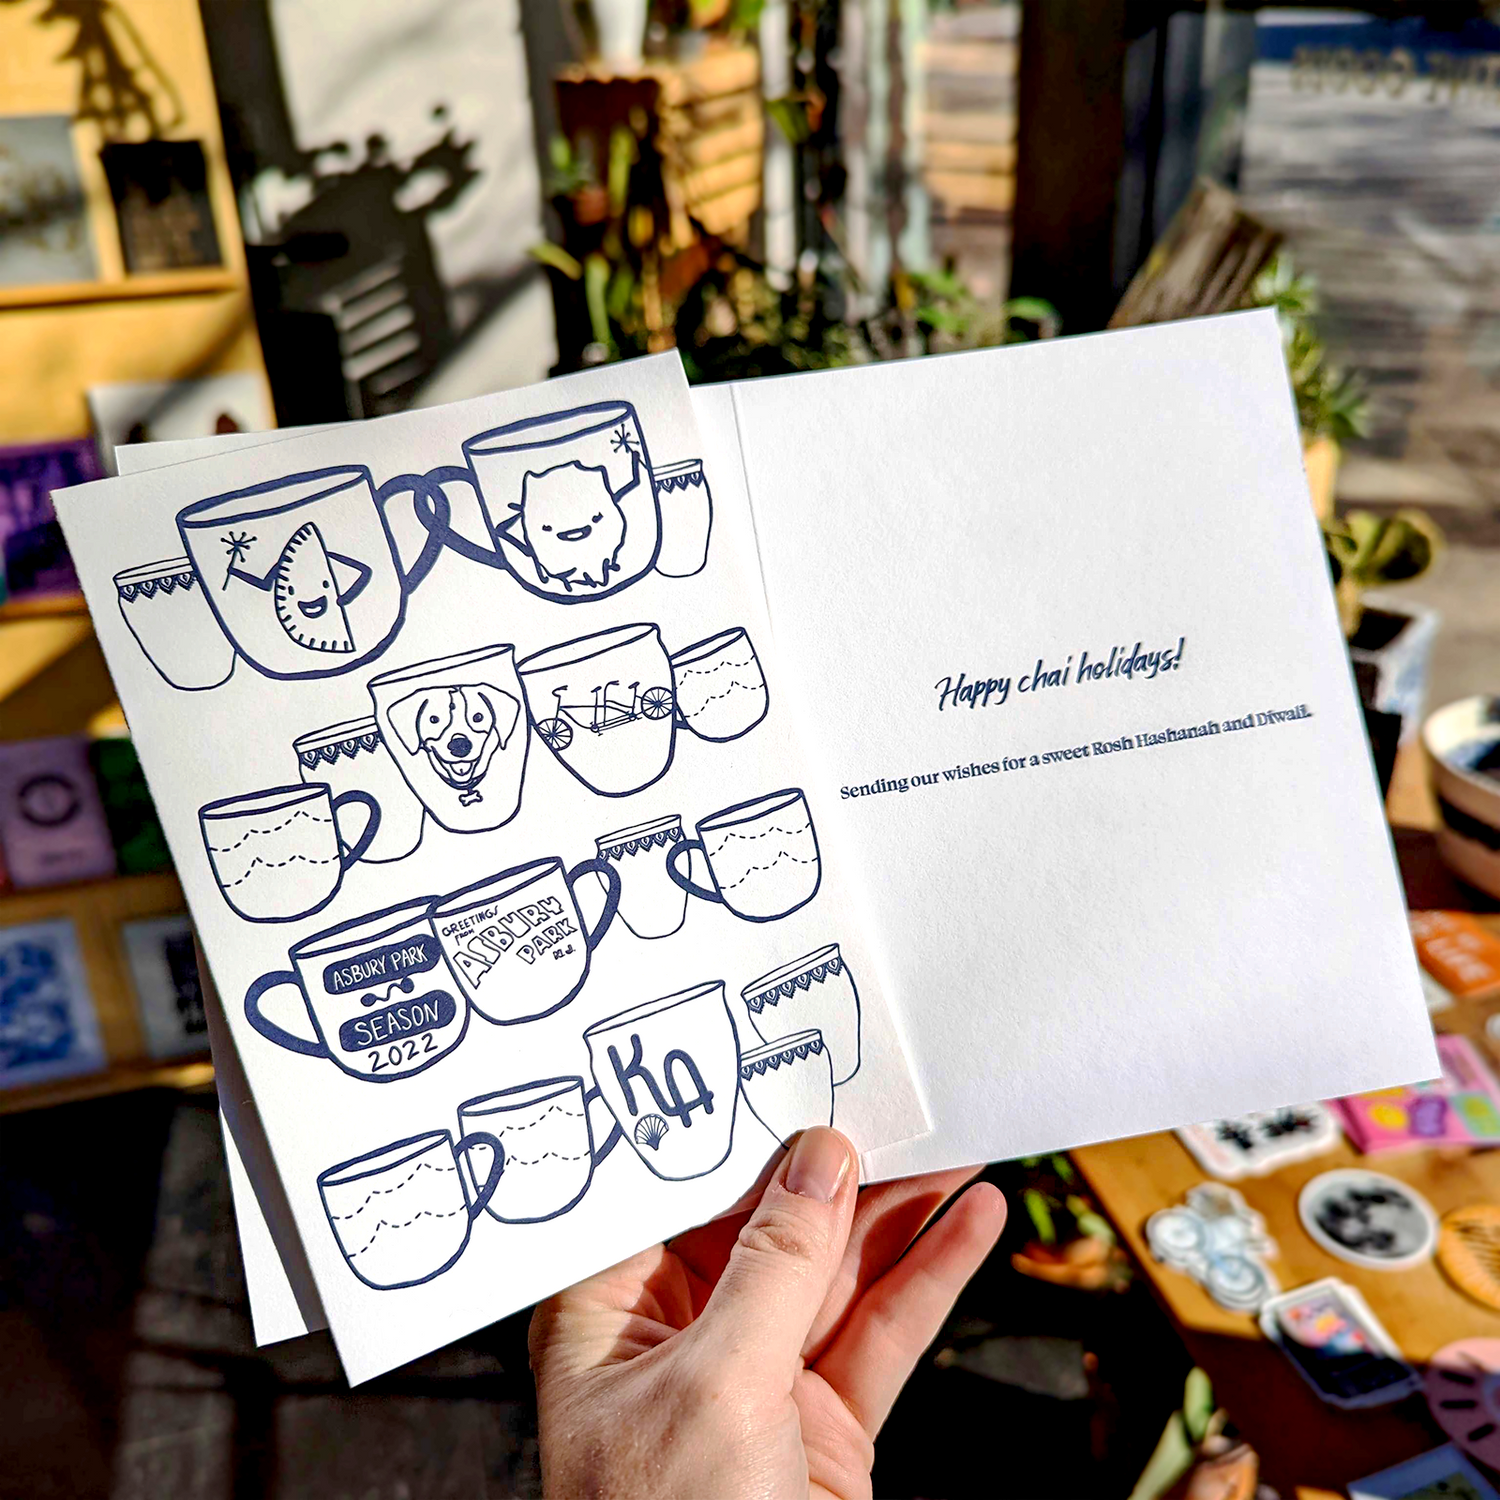 Custom letterpress printed greeting card. Illustration and design by Pretty Good Co. 